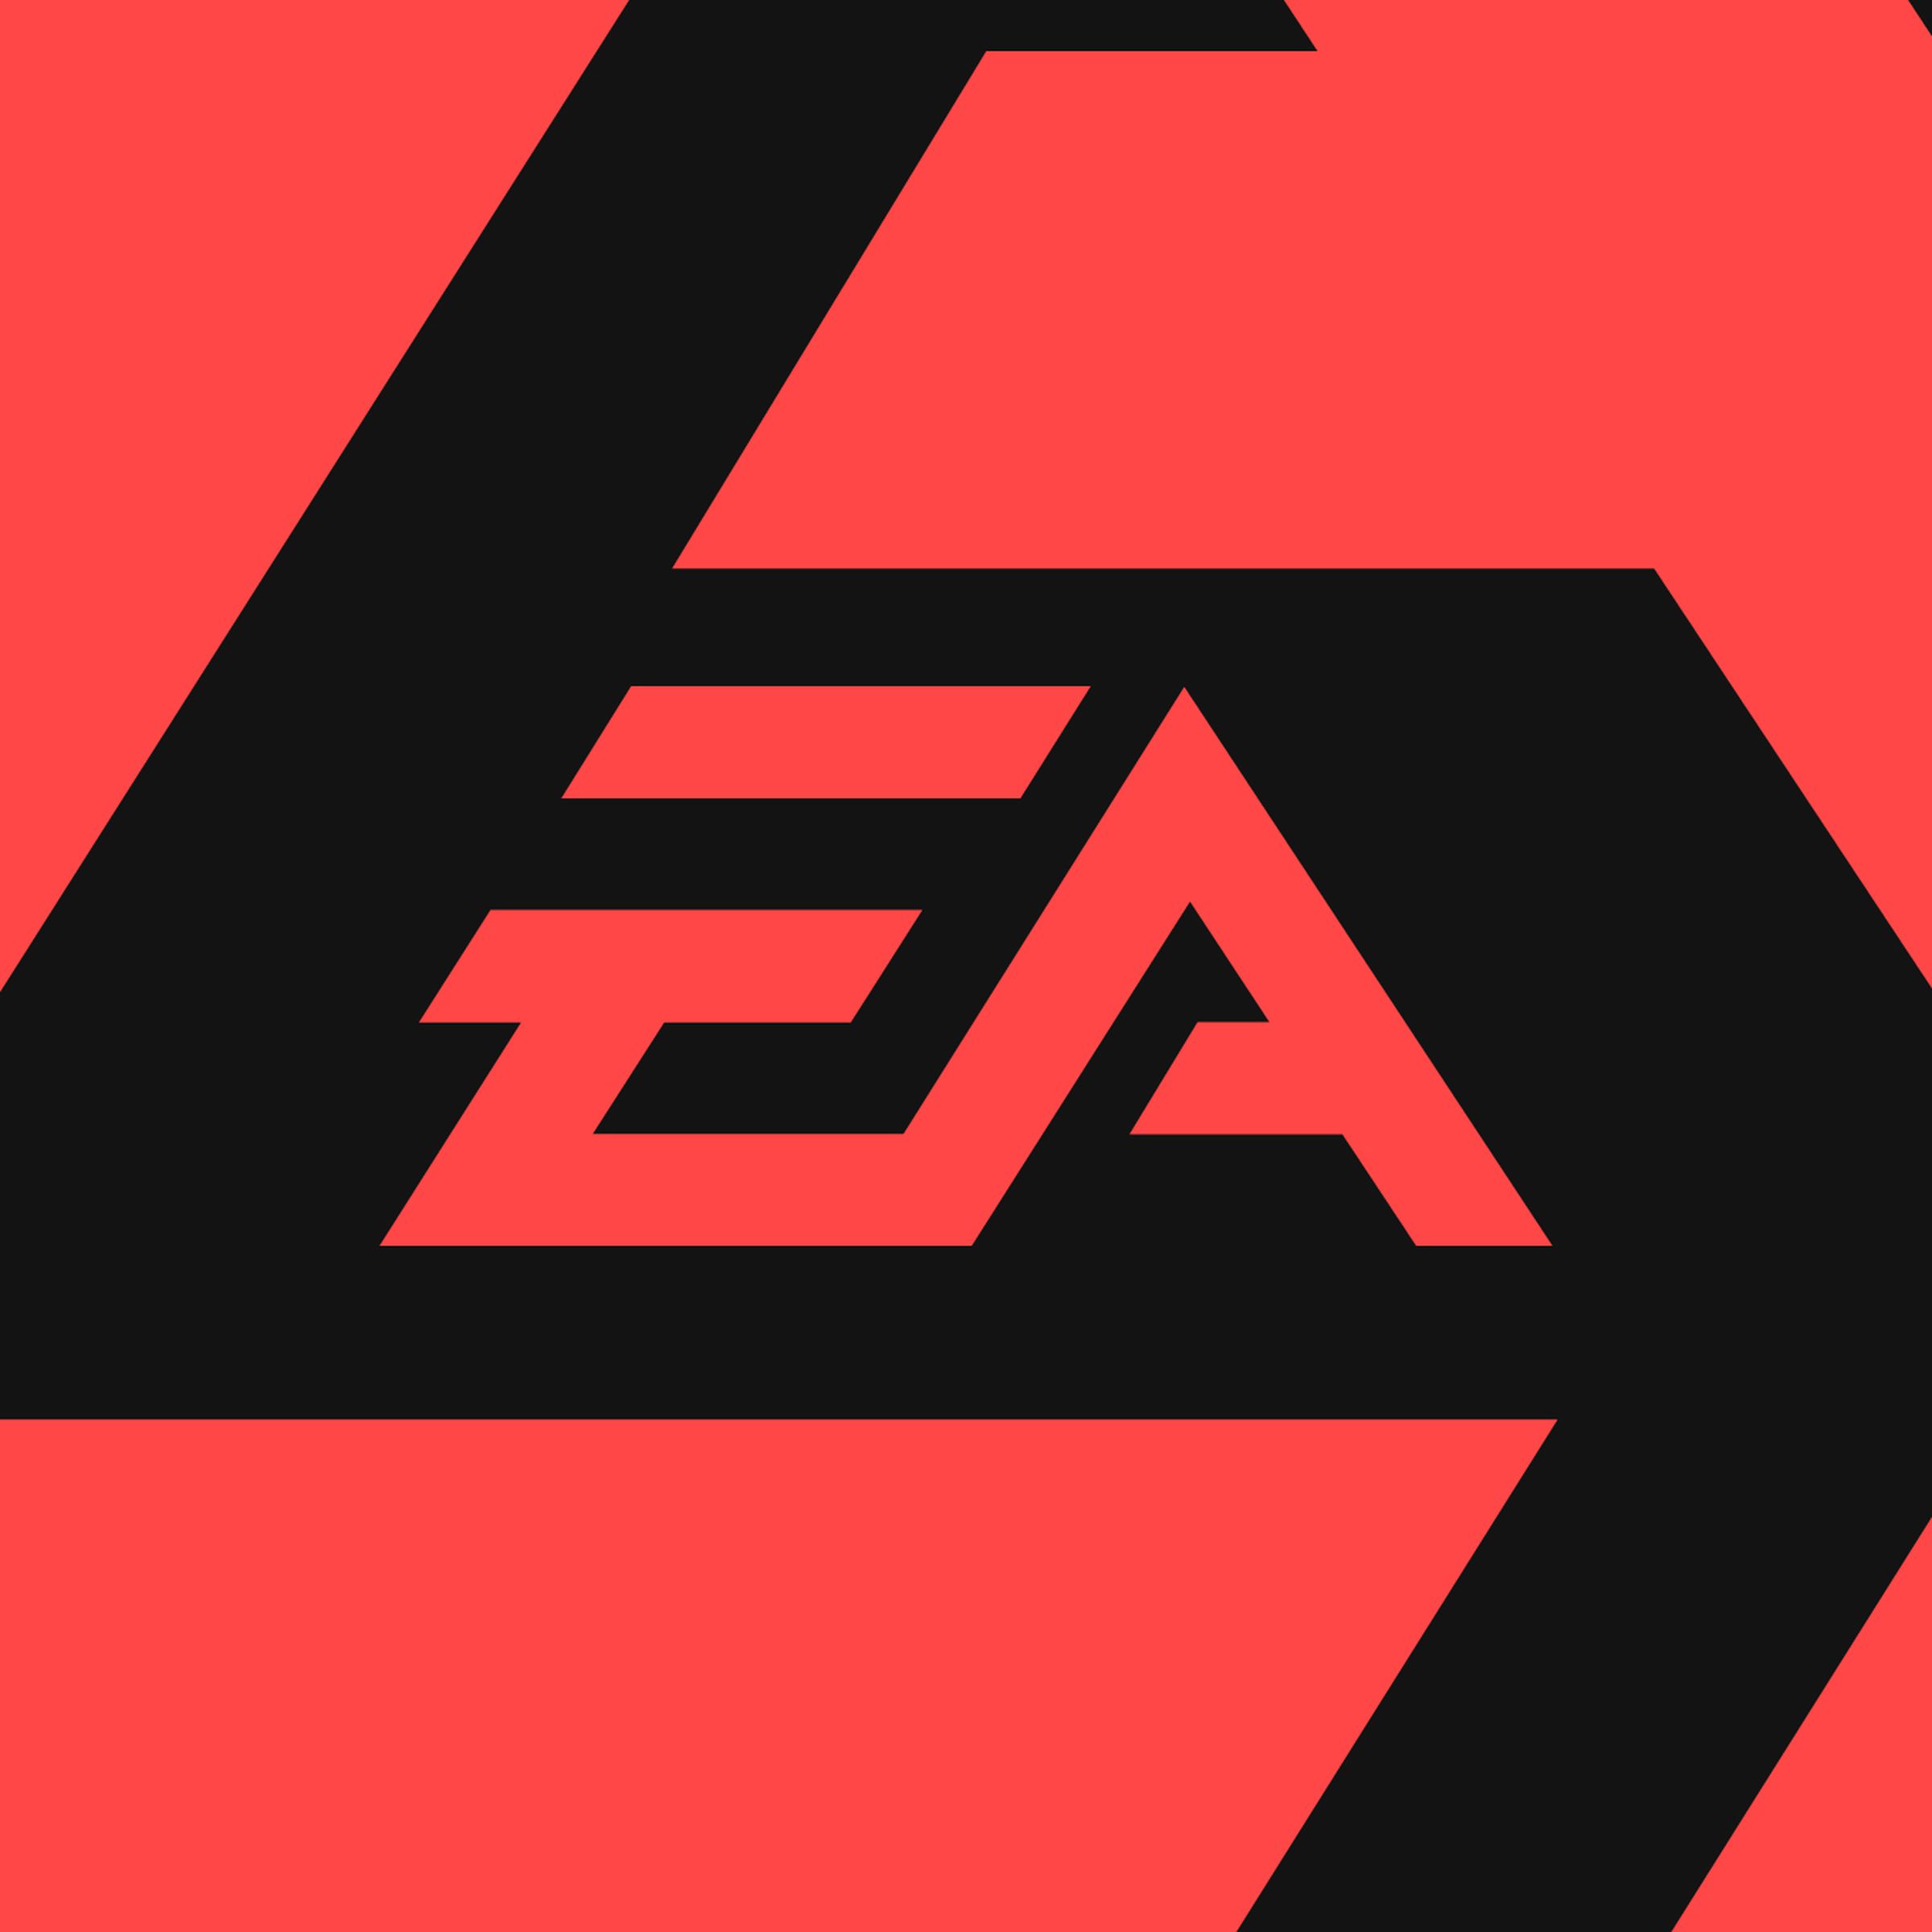 An image showing the EA logo on a red and black background